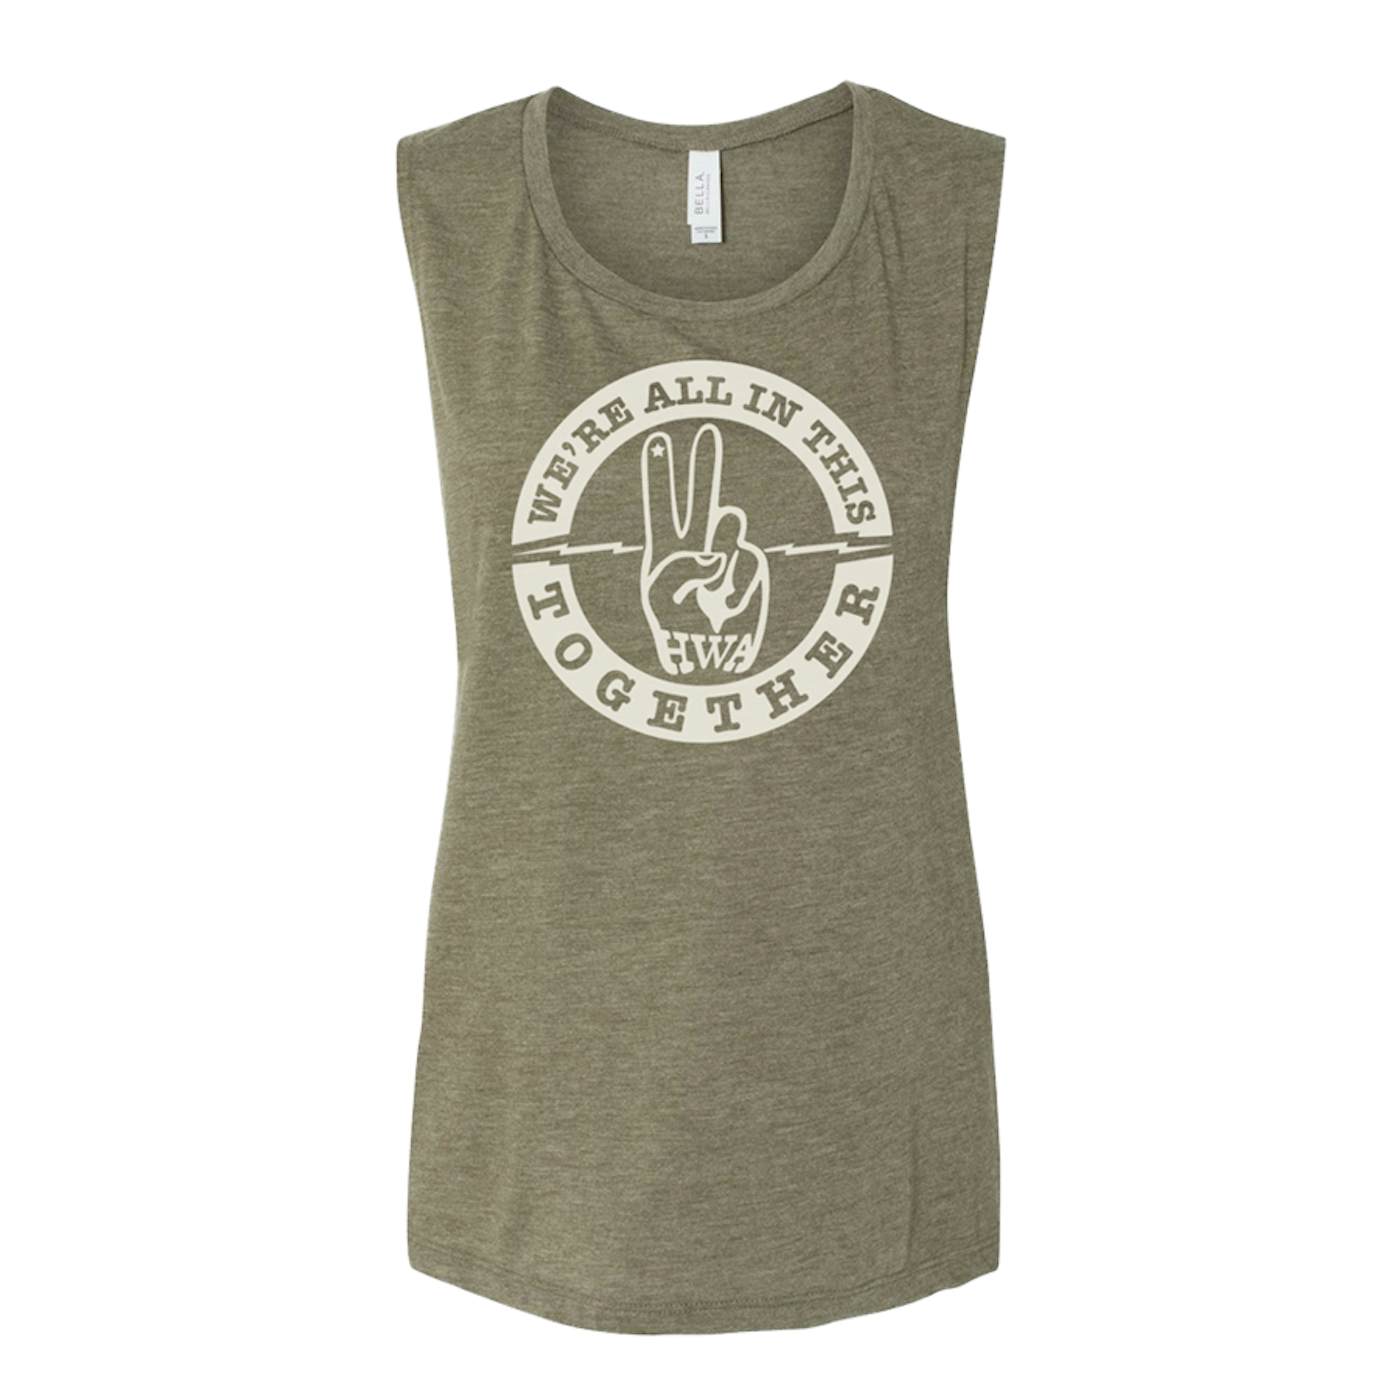 Hard Working Americans "We're All In This Together" Women's Muscle Tee